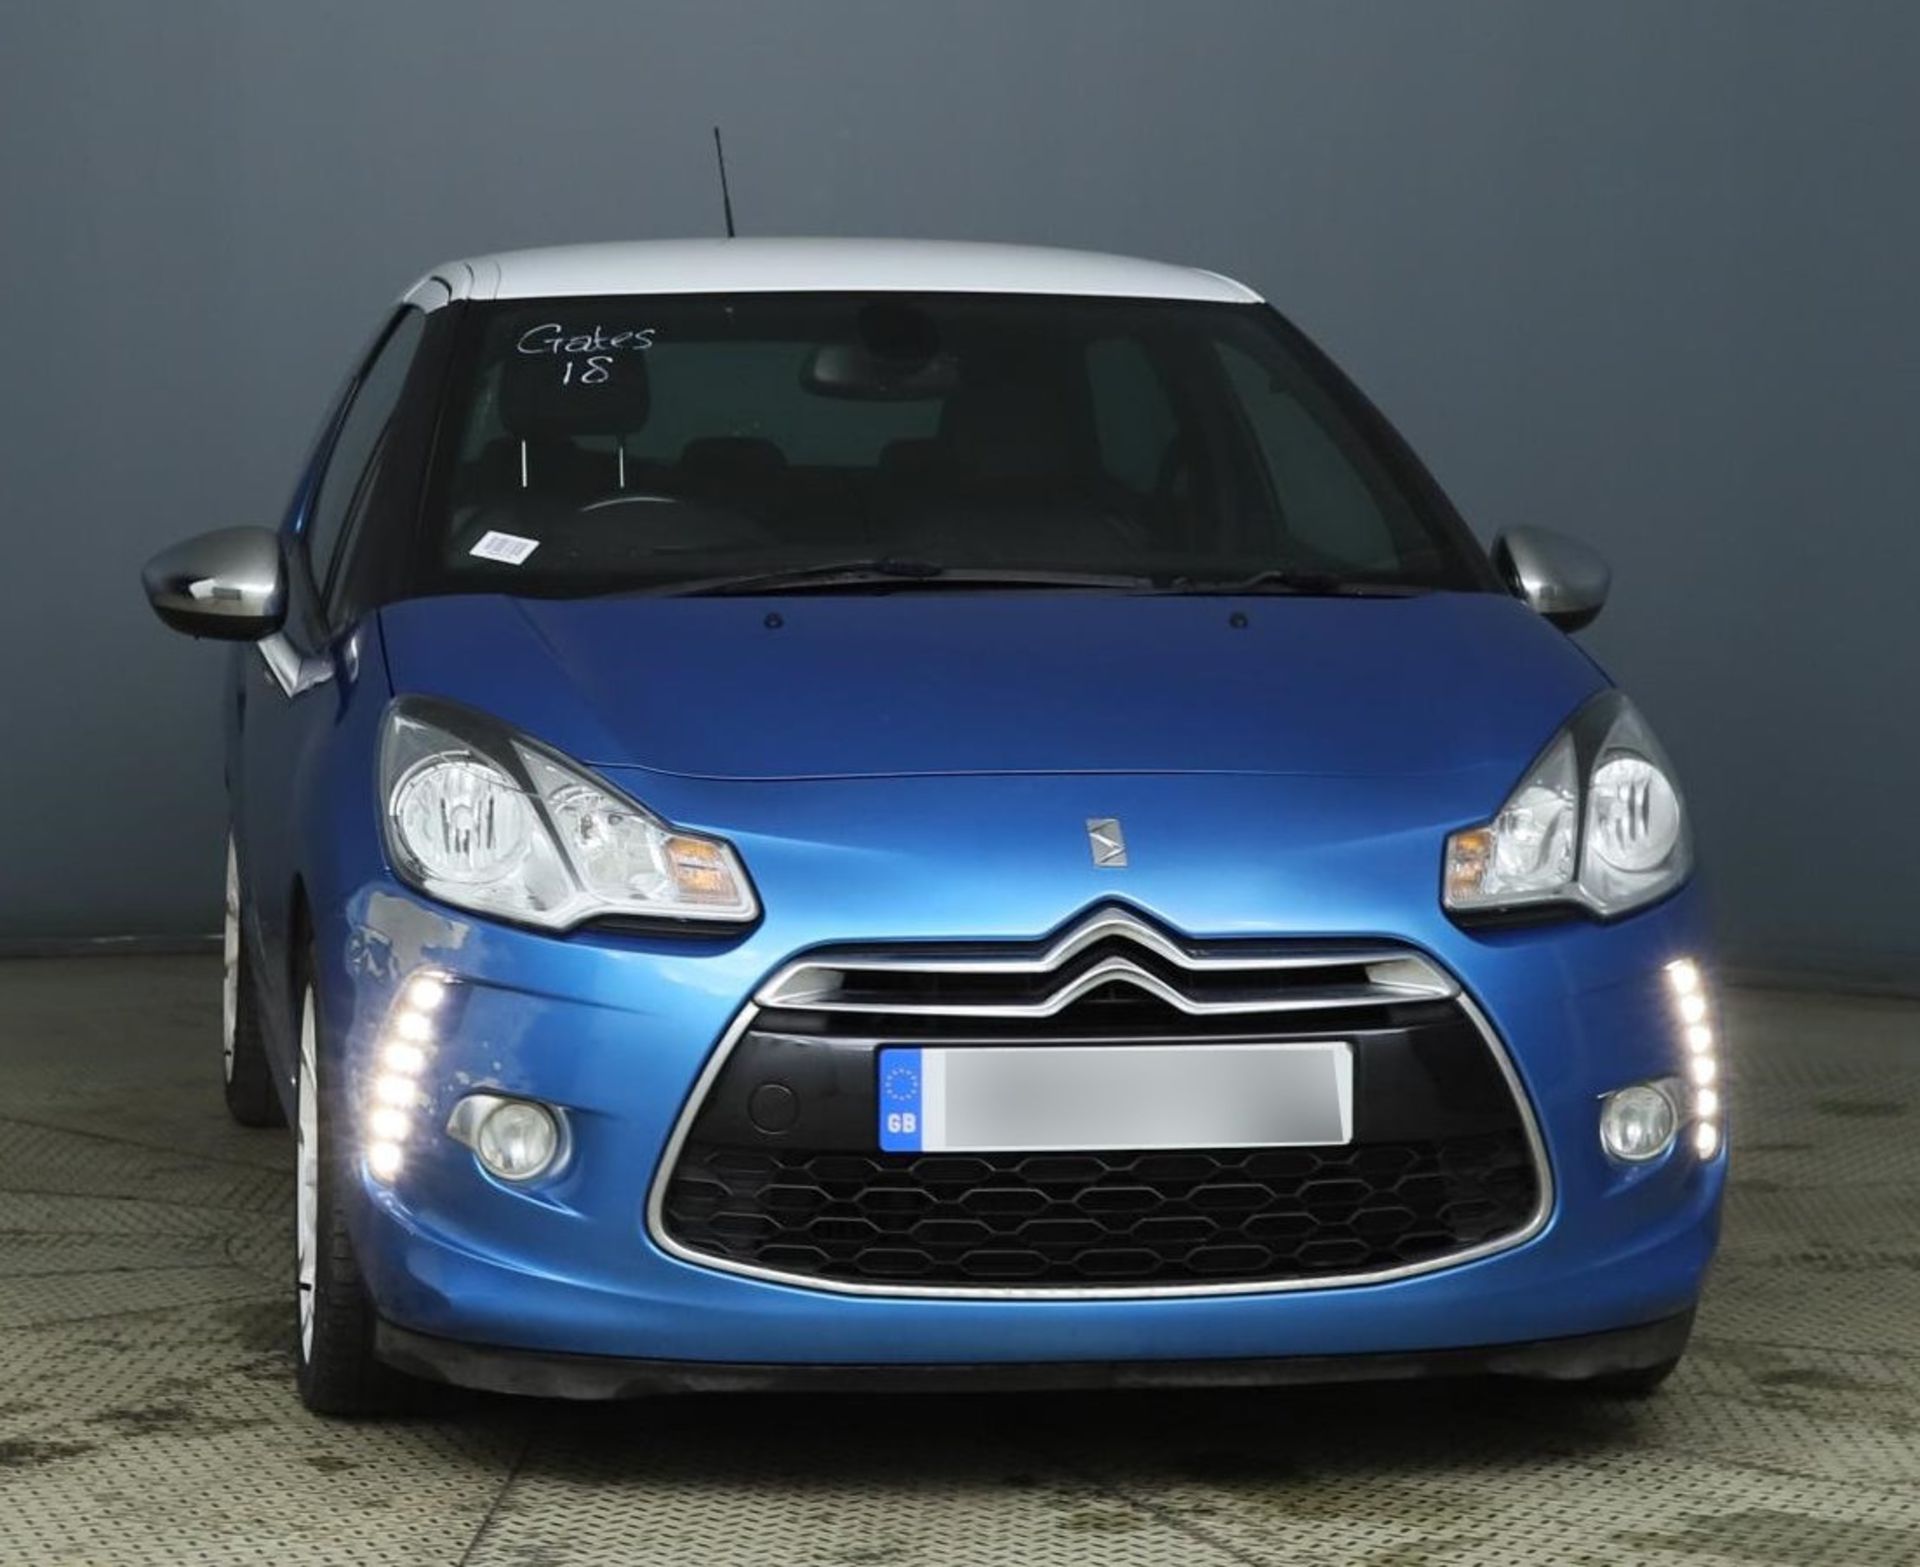 2013 Citroen DS3 1.6 e-HDi 110 Airdream DSport Plus 3dr Hatchback - CL505 - NO VAT ON THE HAMMER - Image 2 of 11